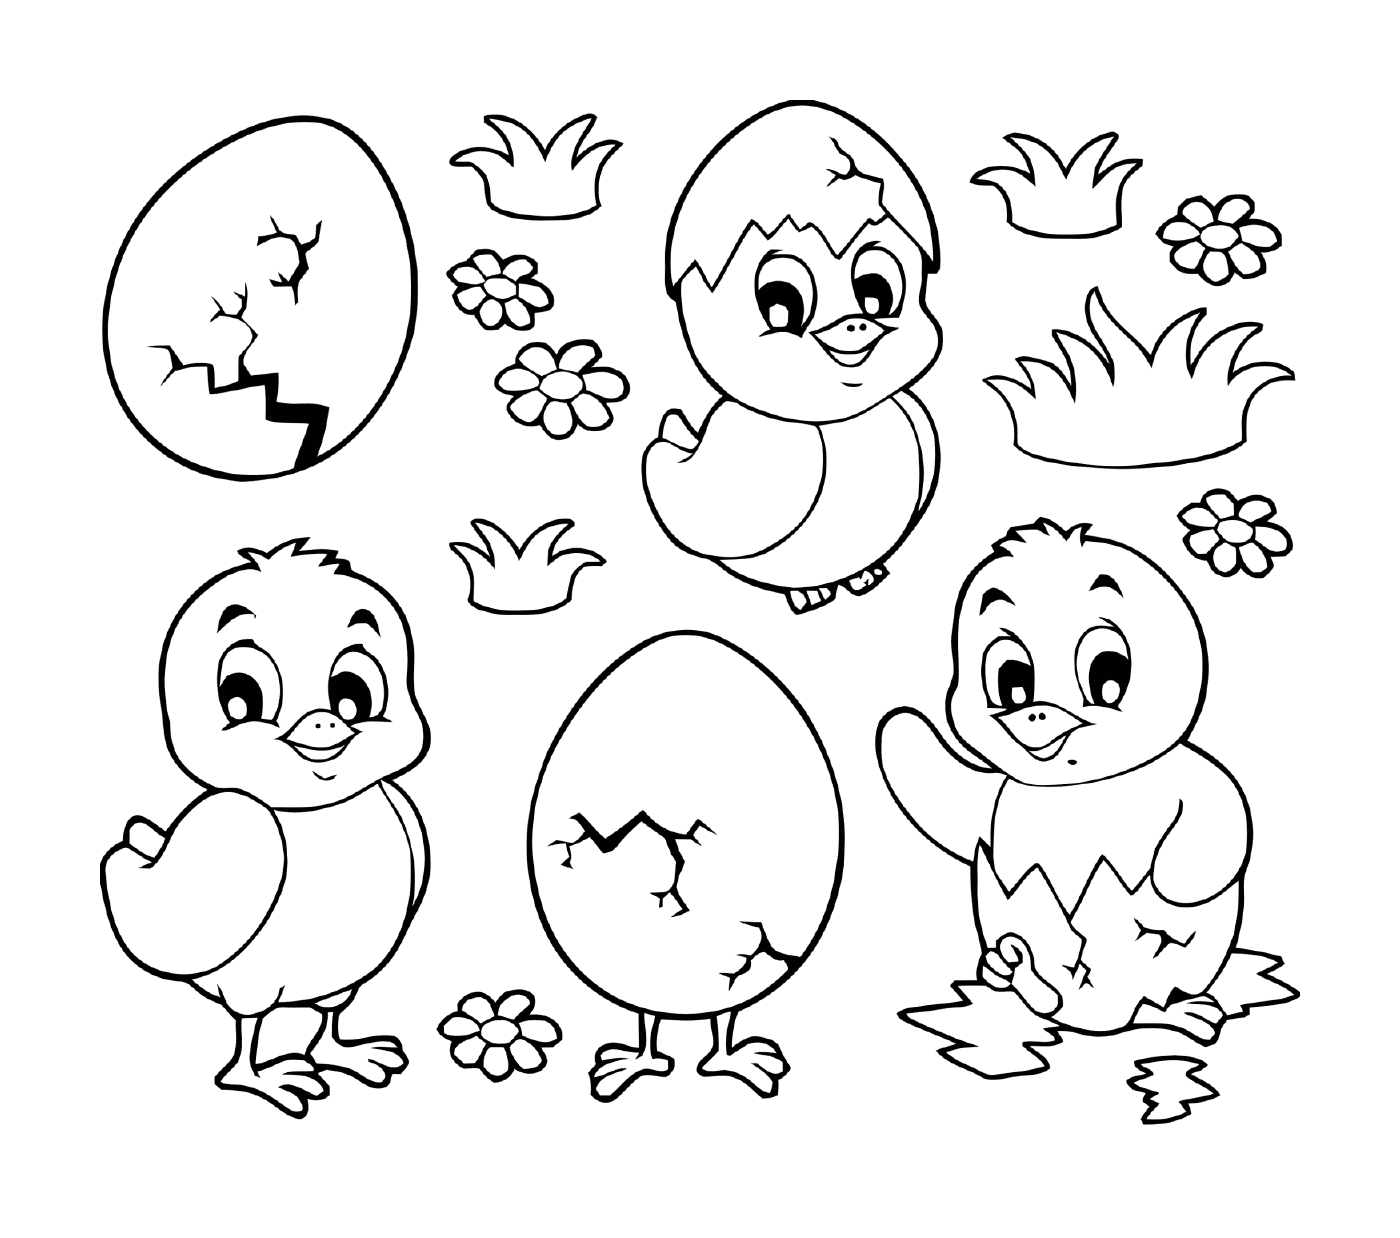  Easter chicks and eggs, cute black and white designs 